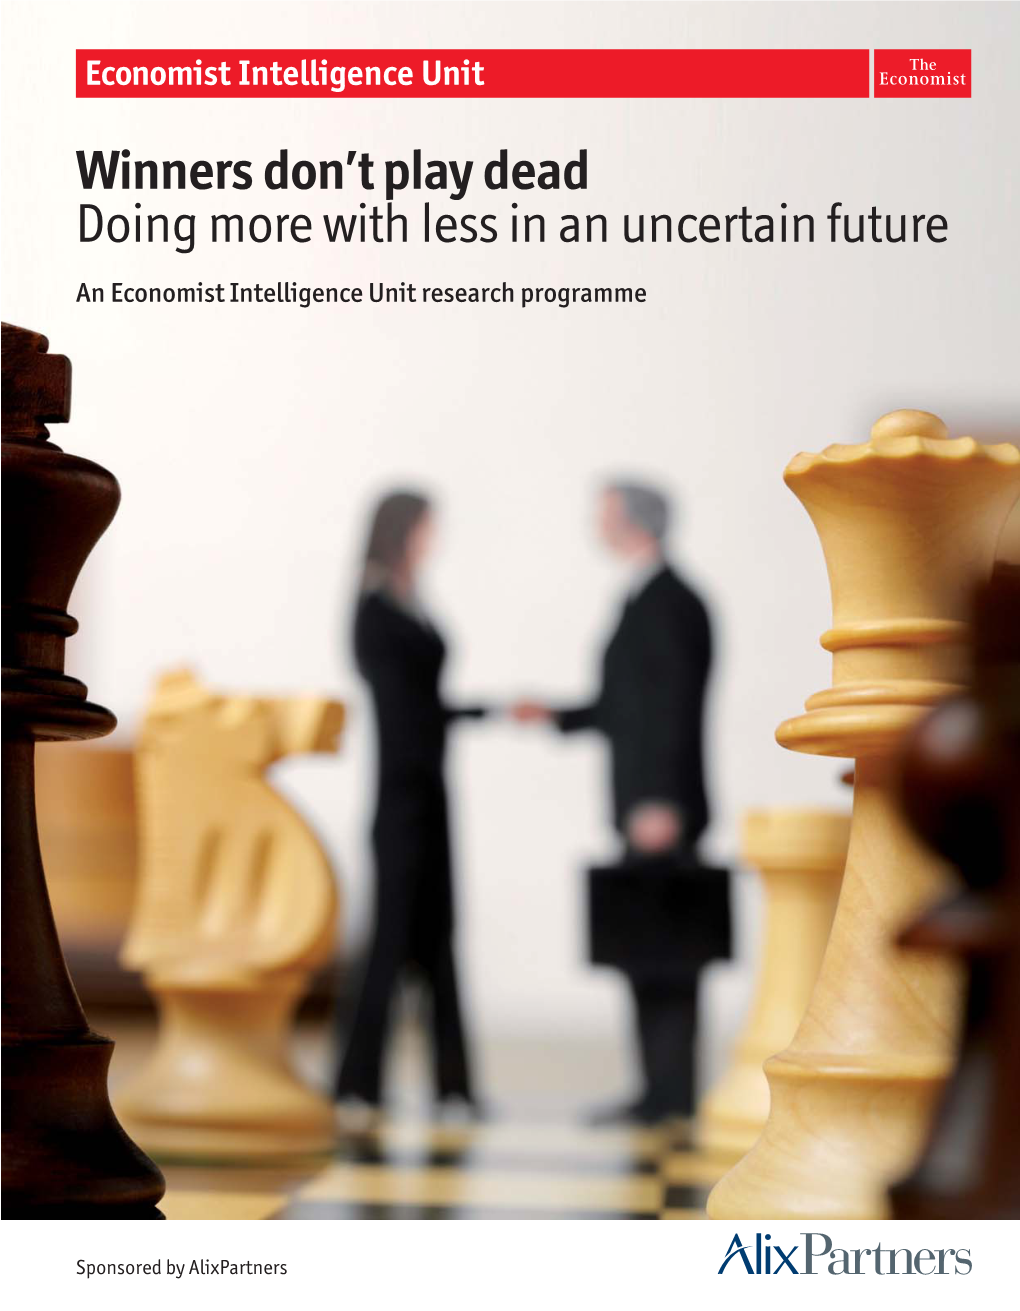 Winners Don't Play Dead Doing More with Less in an Uncertain Future